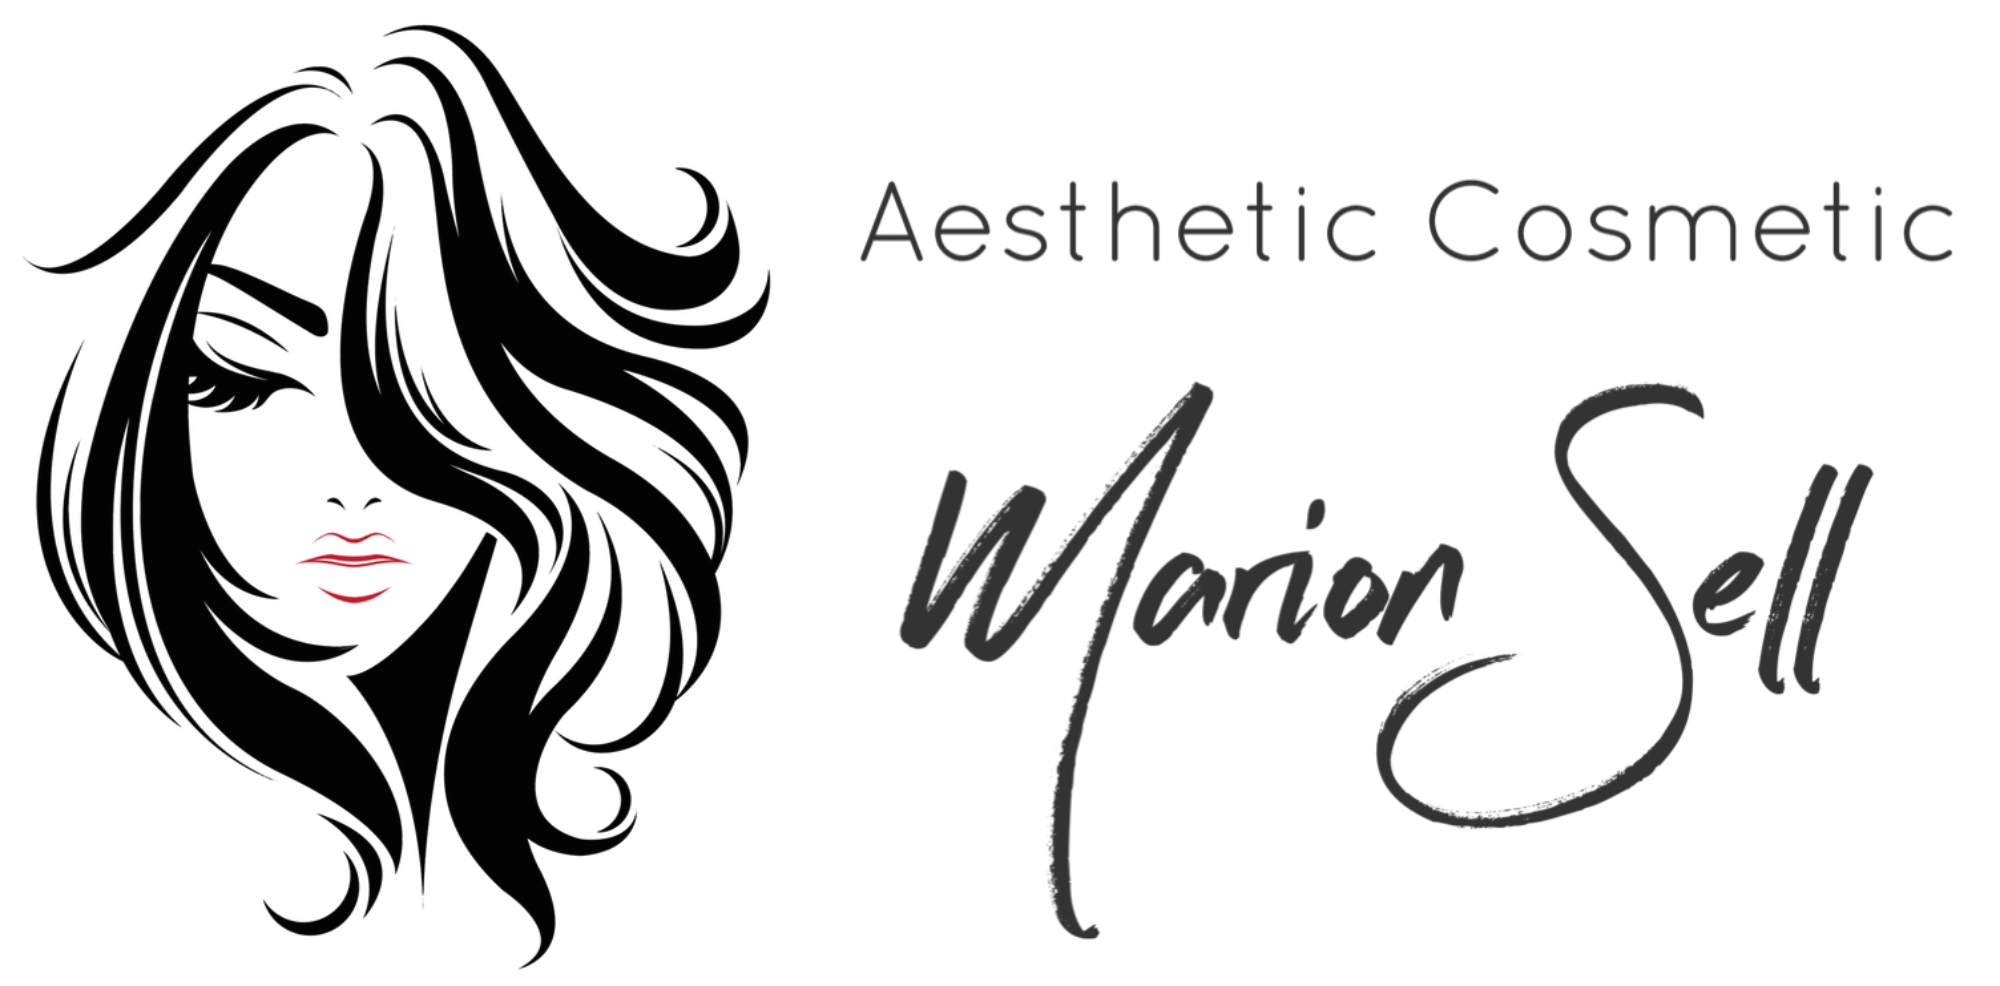 Aesthetic Cosmetic Marion Sell